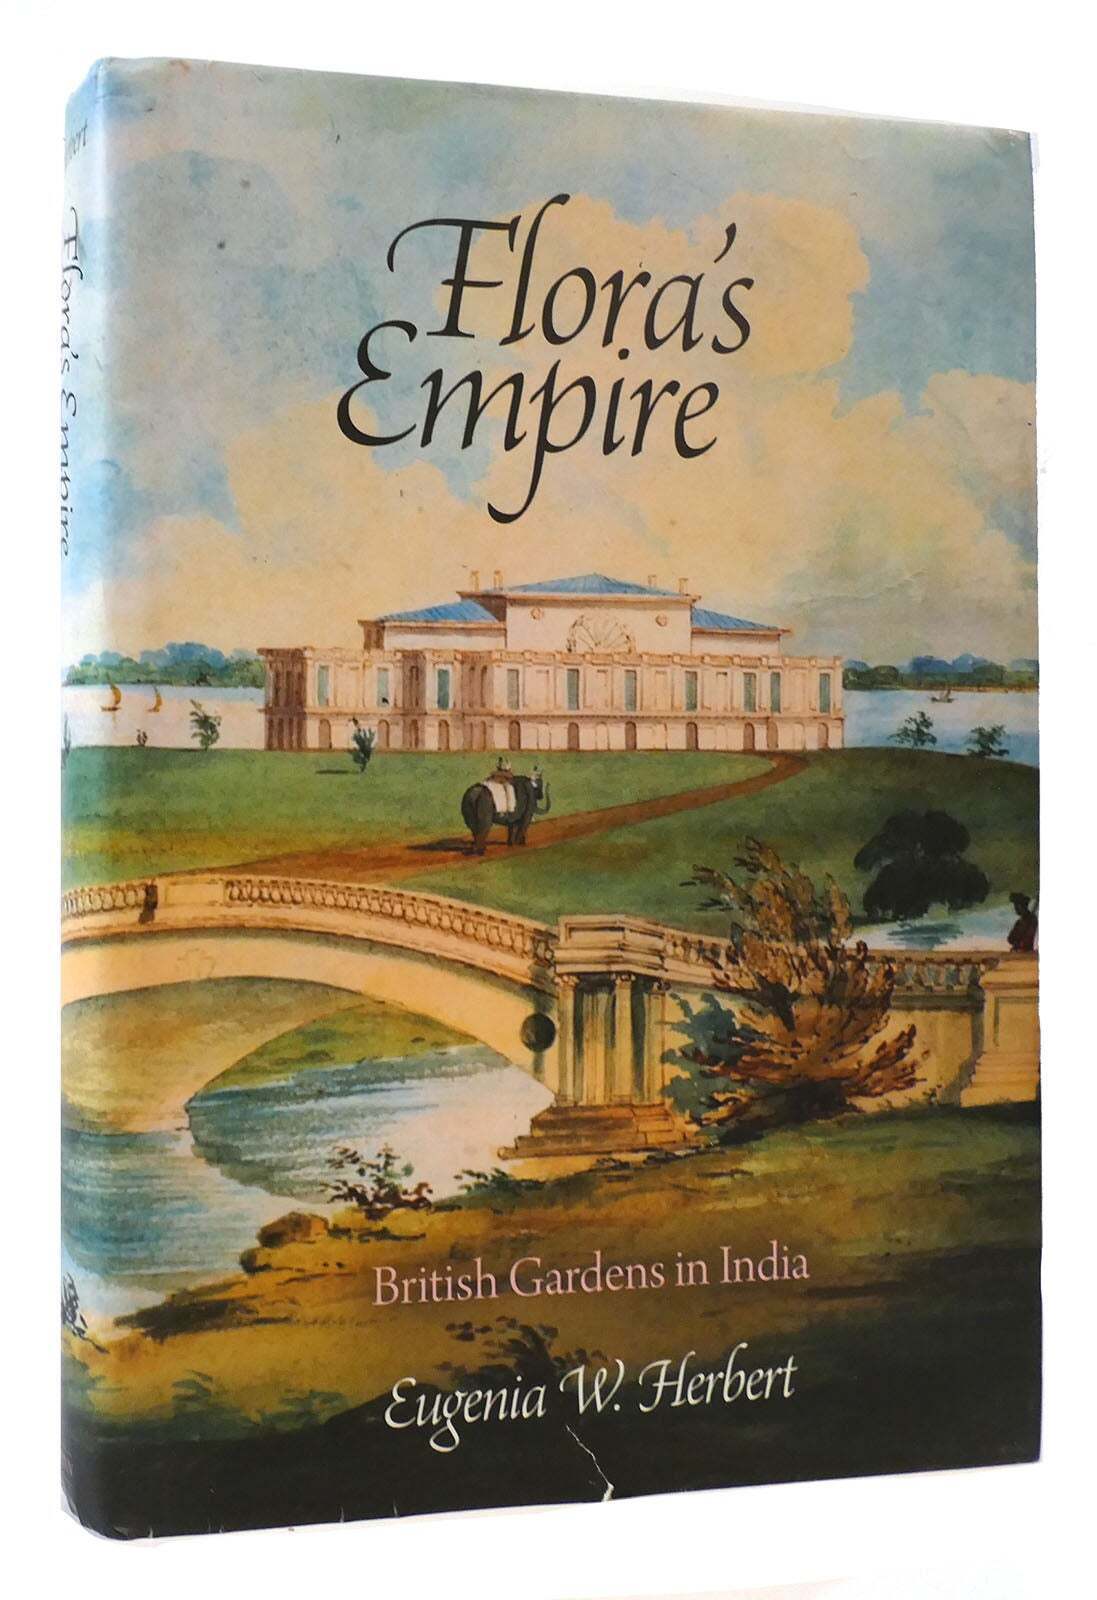 Image of Eugenia W.Herbert FLORA S Empire British Gardens IN India 1st Edition 1st